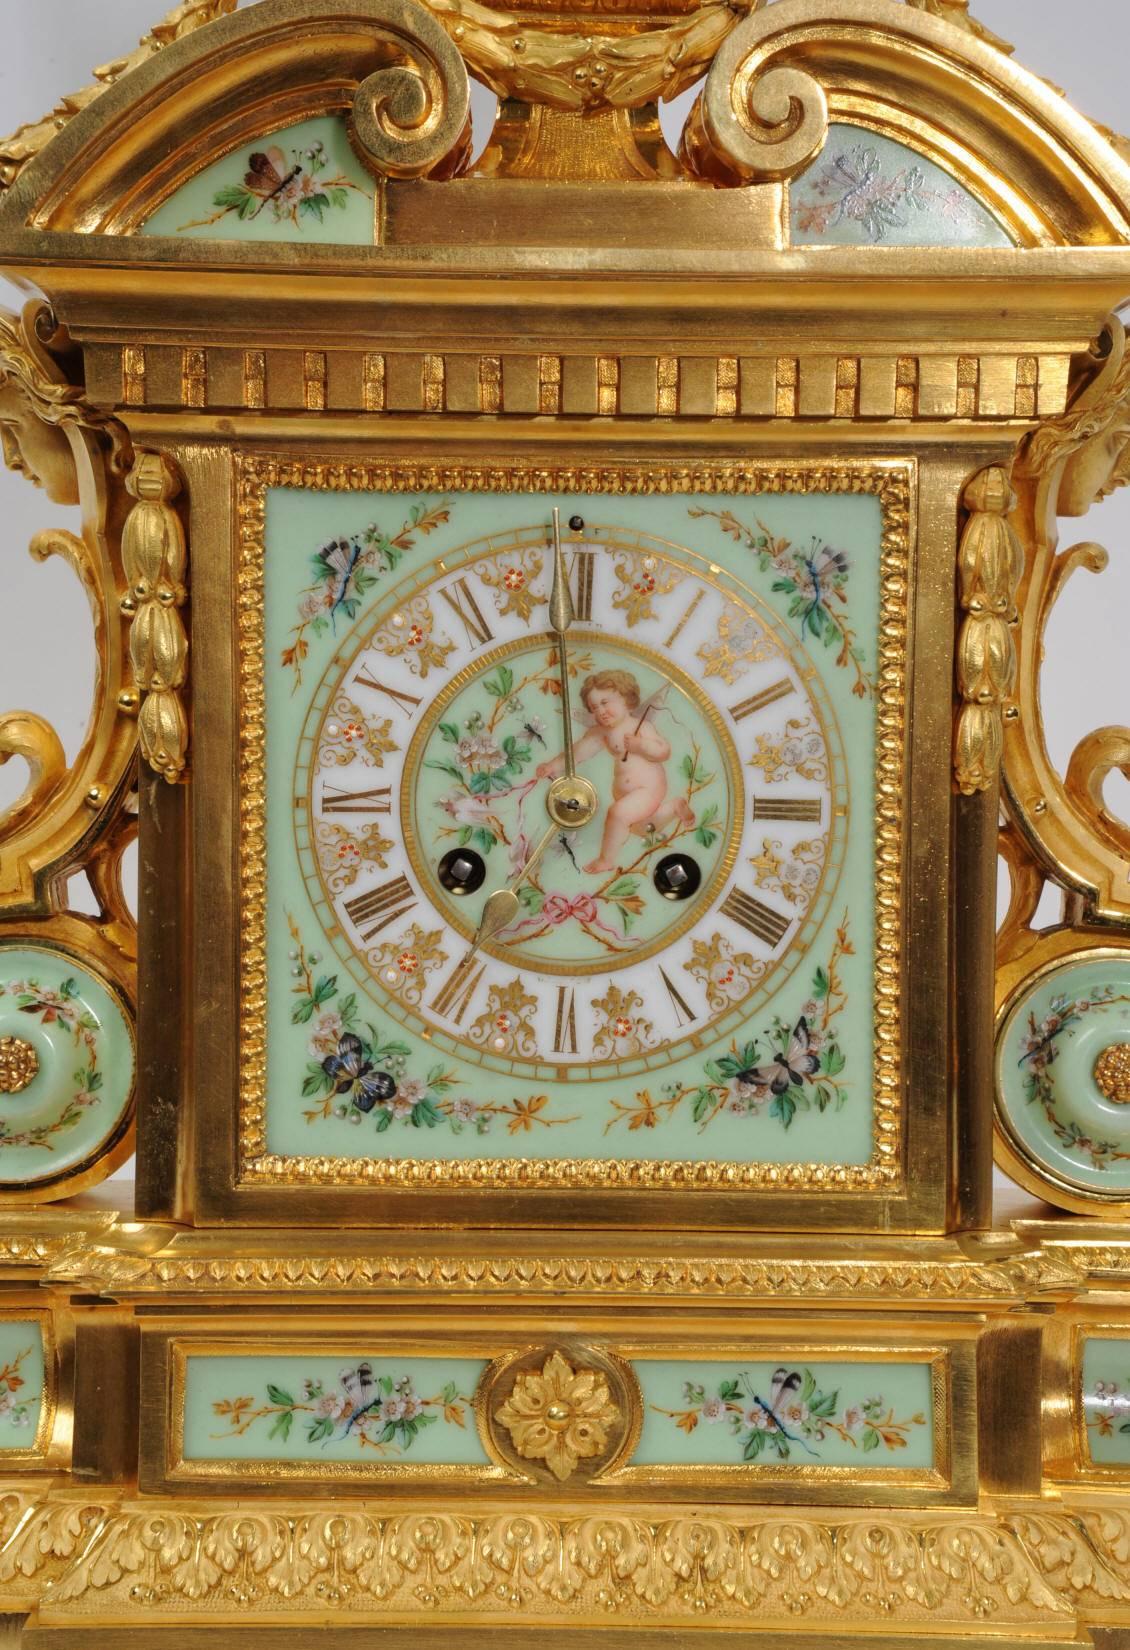 19th Century Large and Magnificent Ormolu and Sèvres Porcelain Clock by Achille Brocot